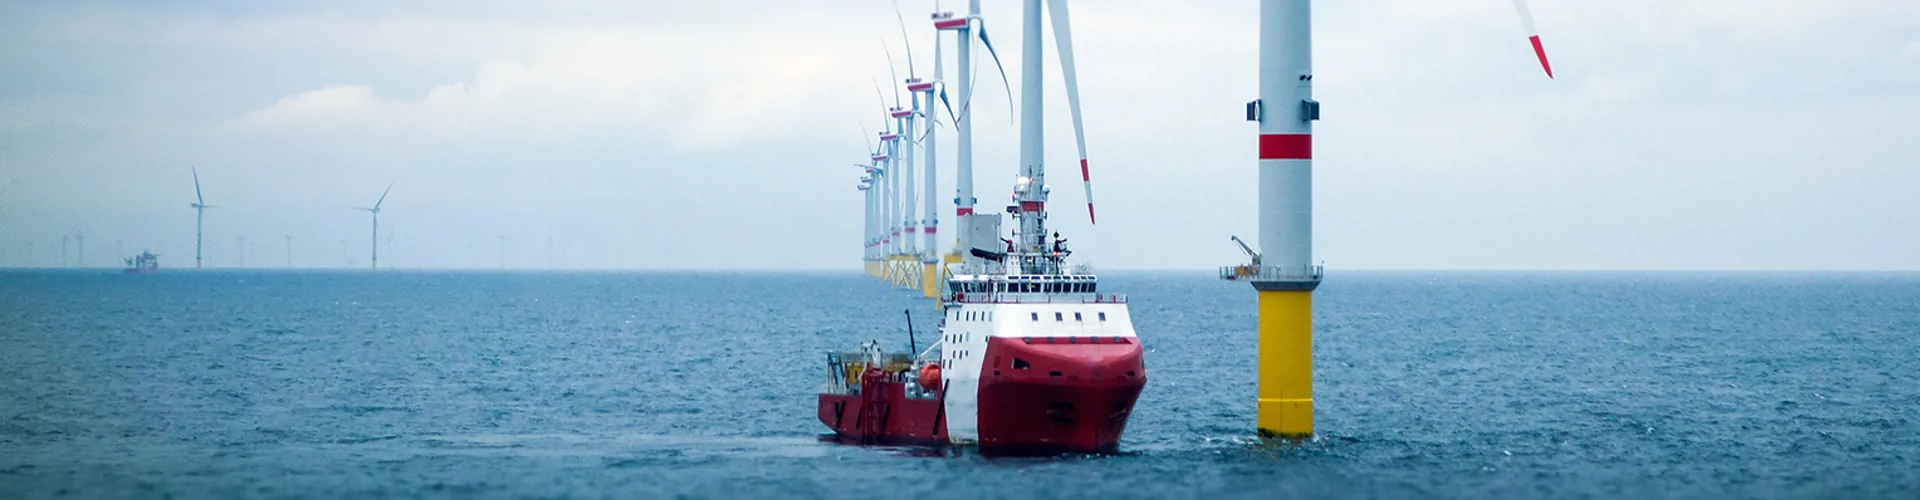 Big Offshore wind-farm with transfer vessel